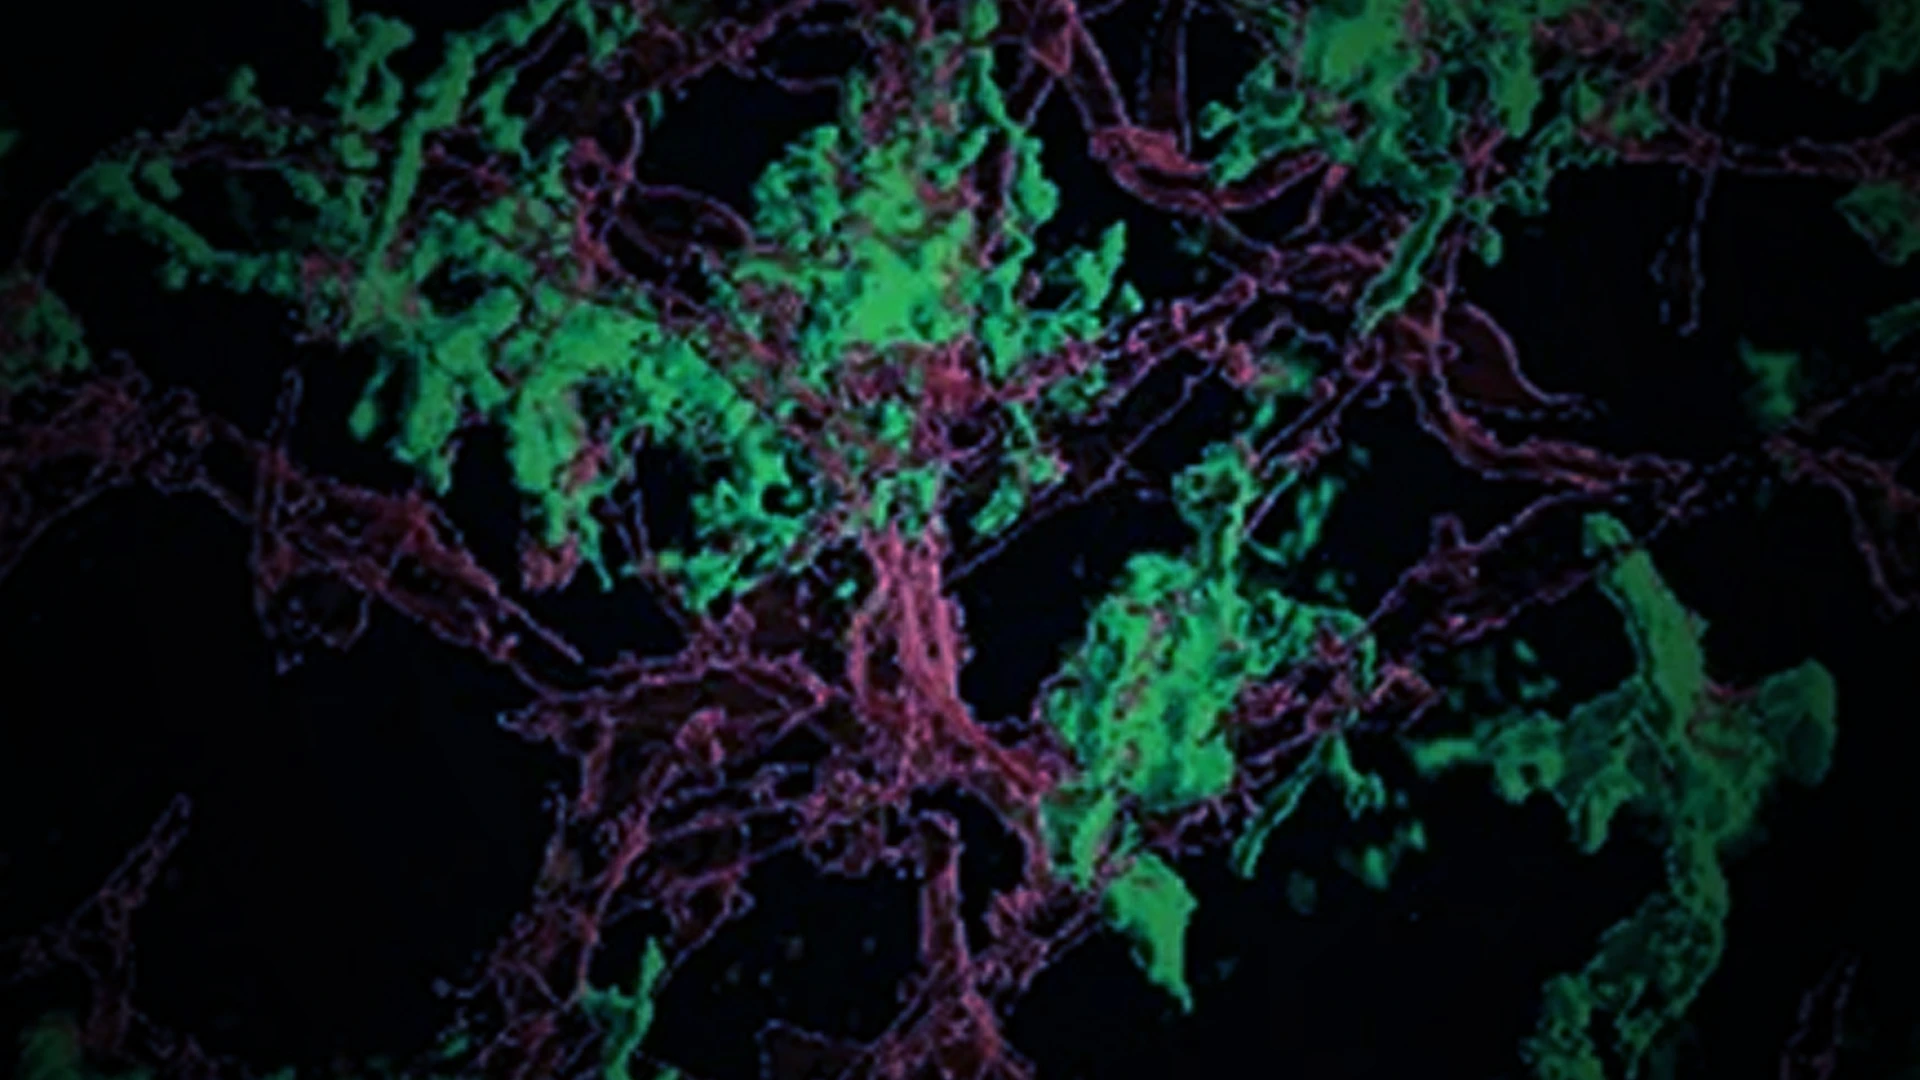 Microglia Could Be The Key to Slowing Invasion and Relapse in Glioblastoma